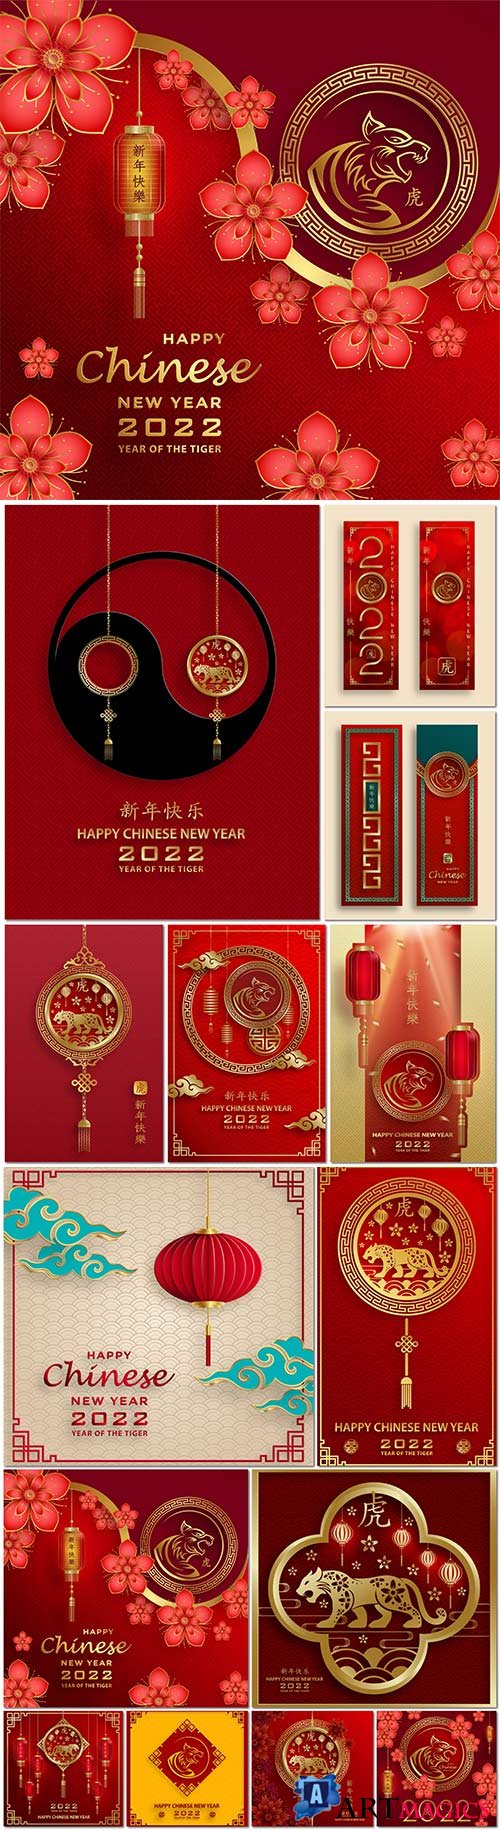 Happy new year 2022, tiger zodiac sign chinese vector design